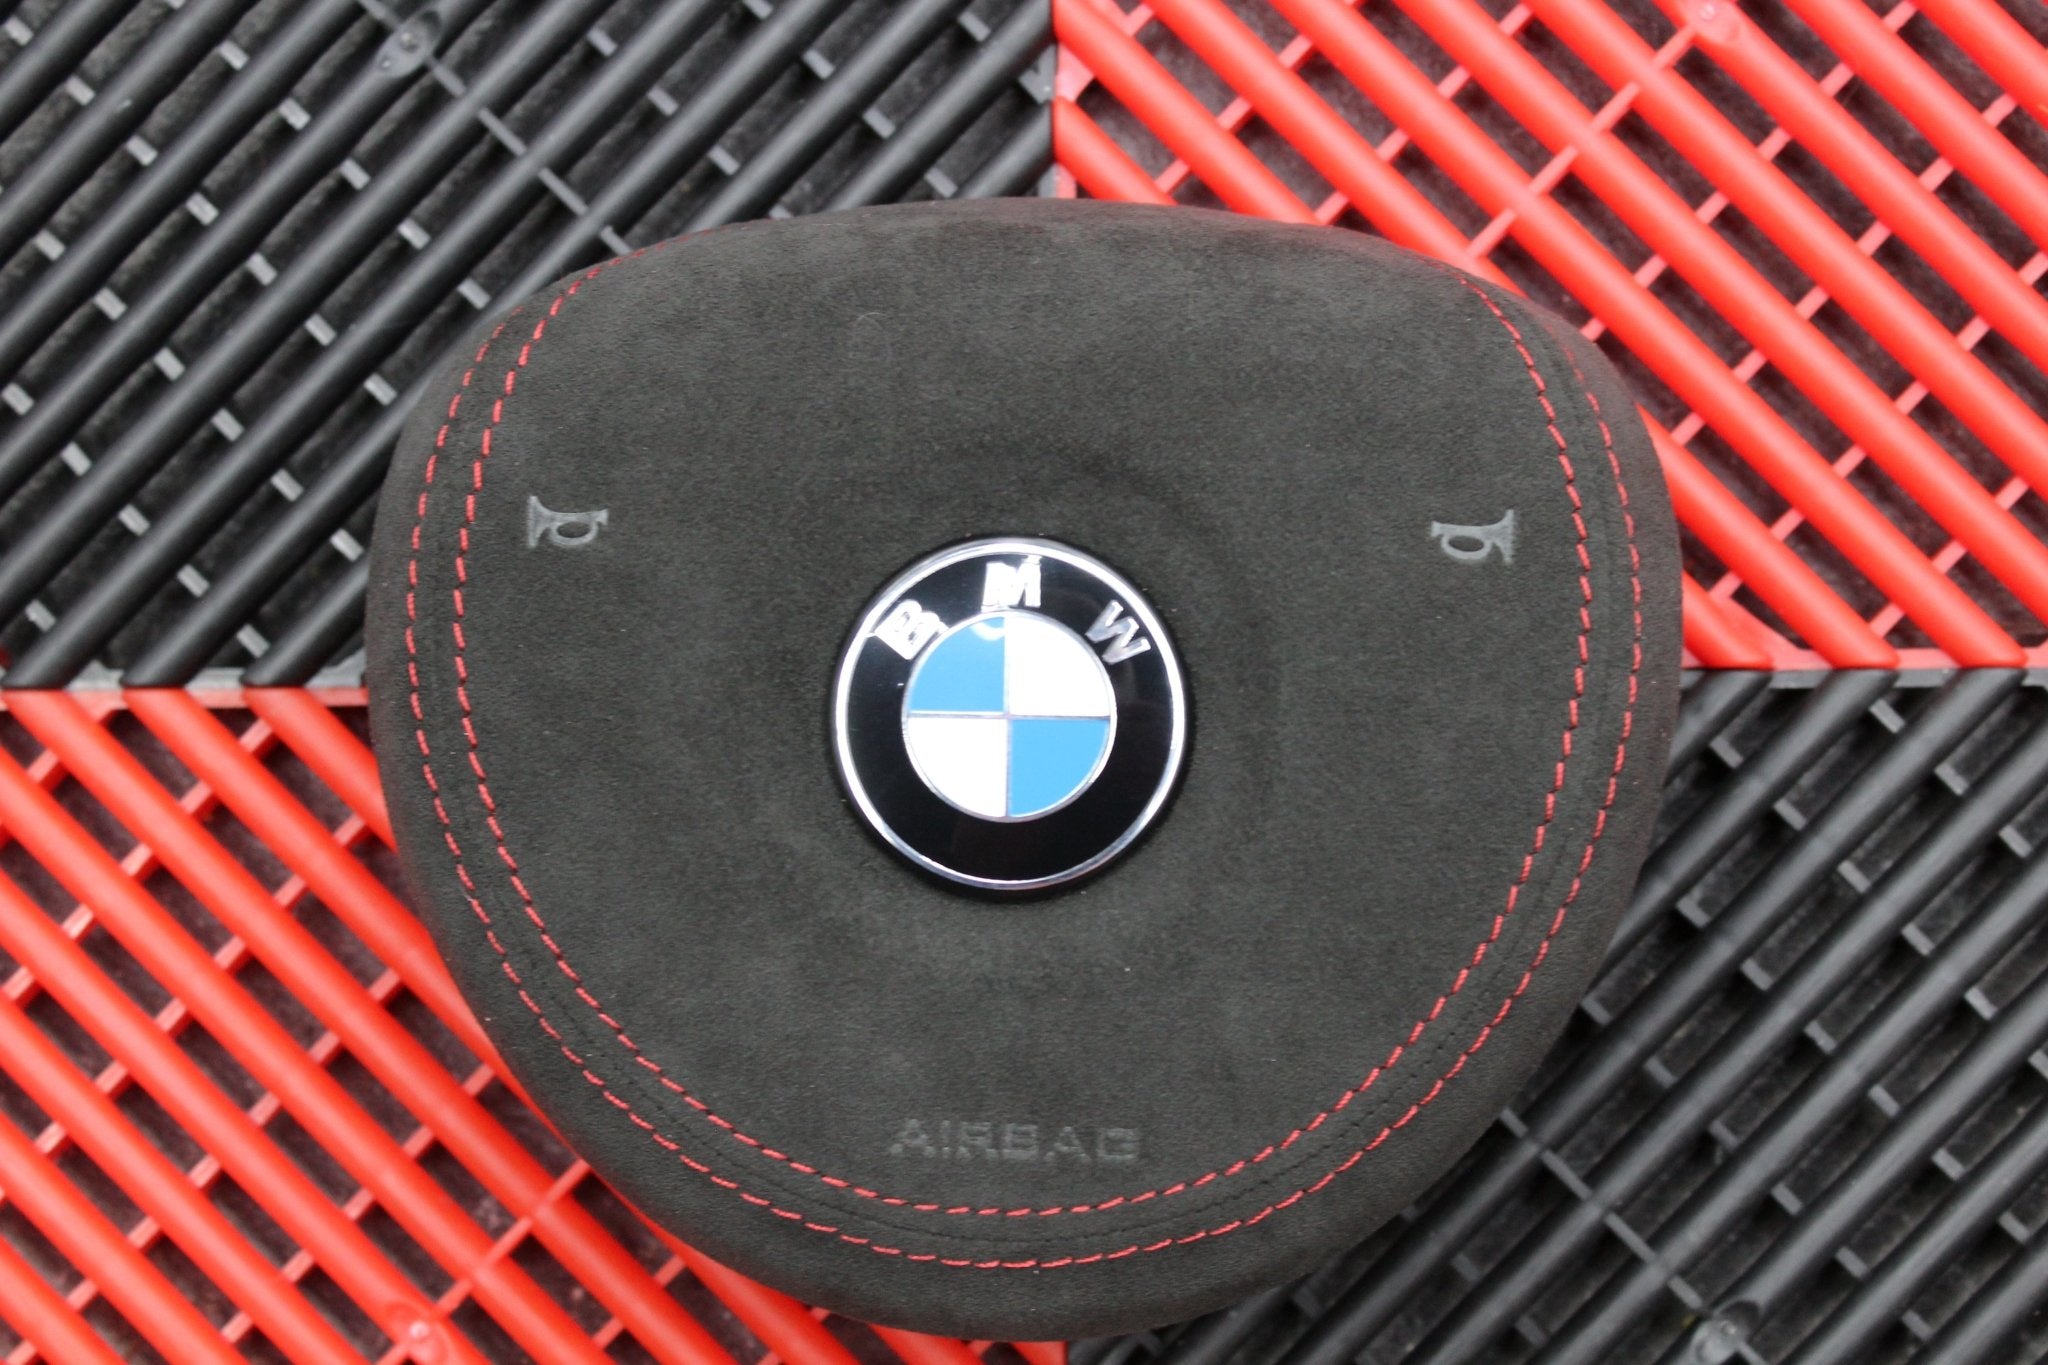 BMW Alcantara airbag cover with red stitching